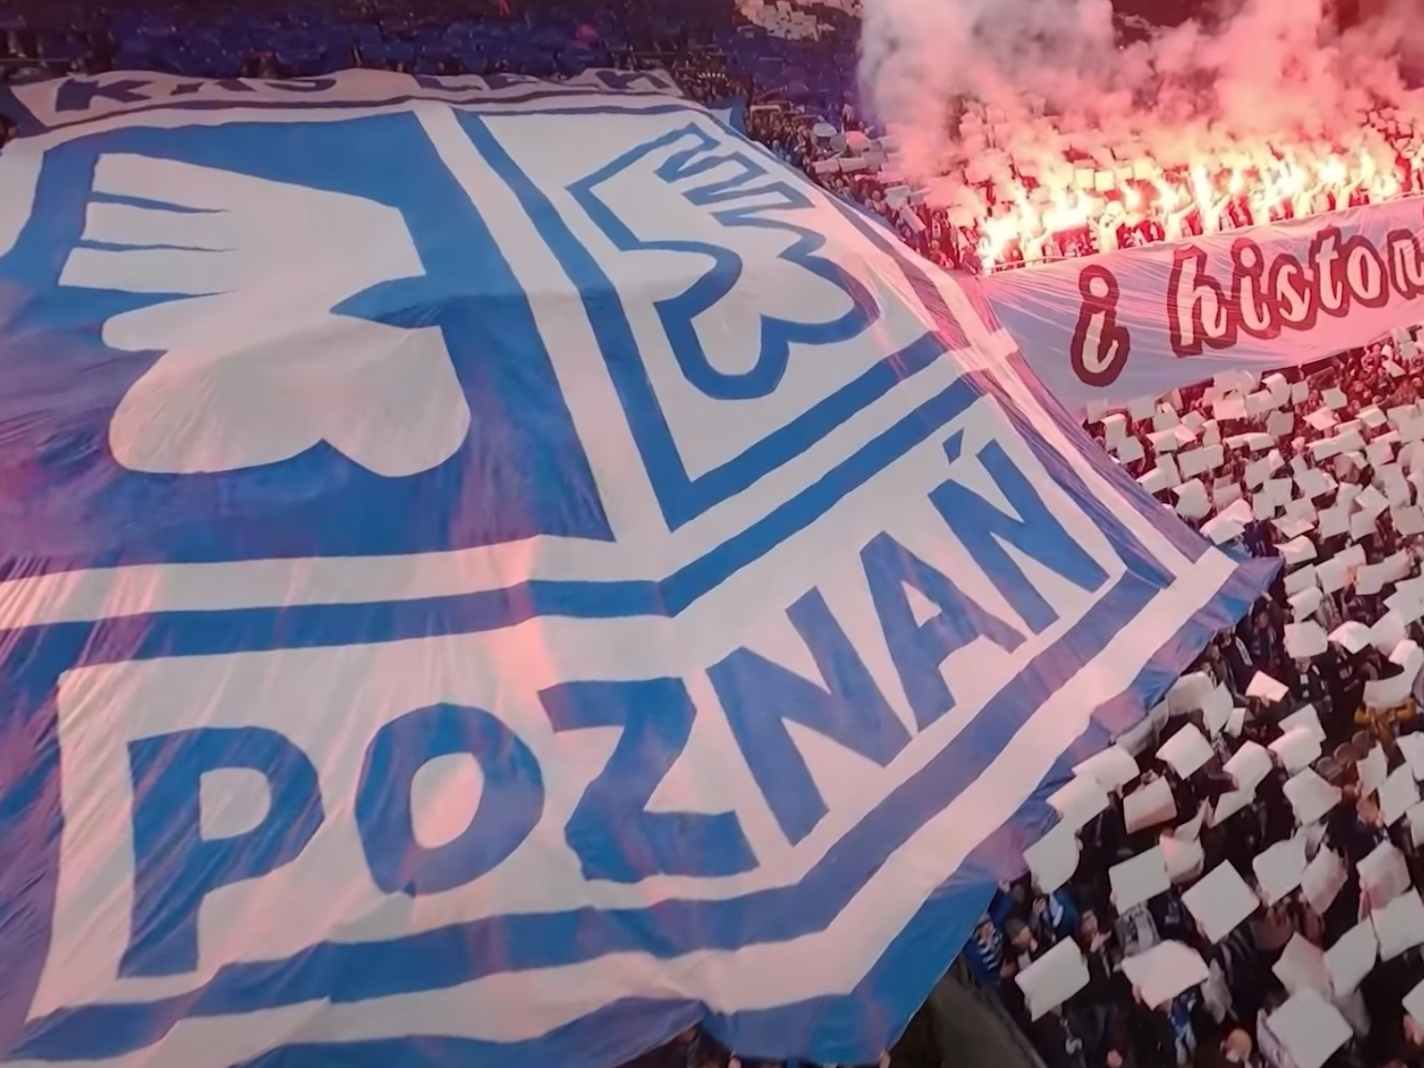 Spectacular drone footage captures the power of Lech Poznan fans at home games